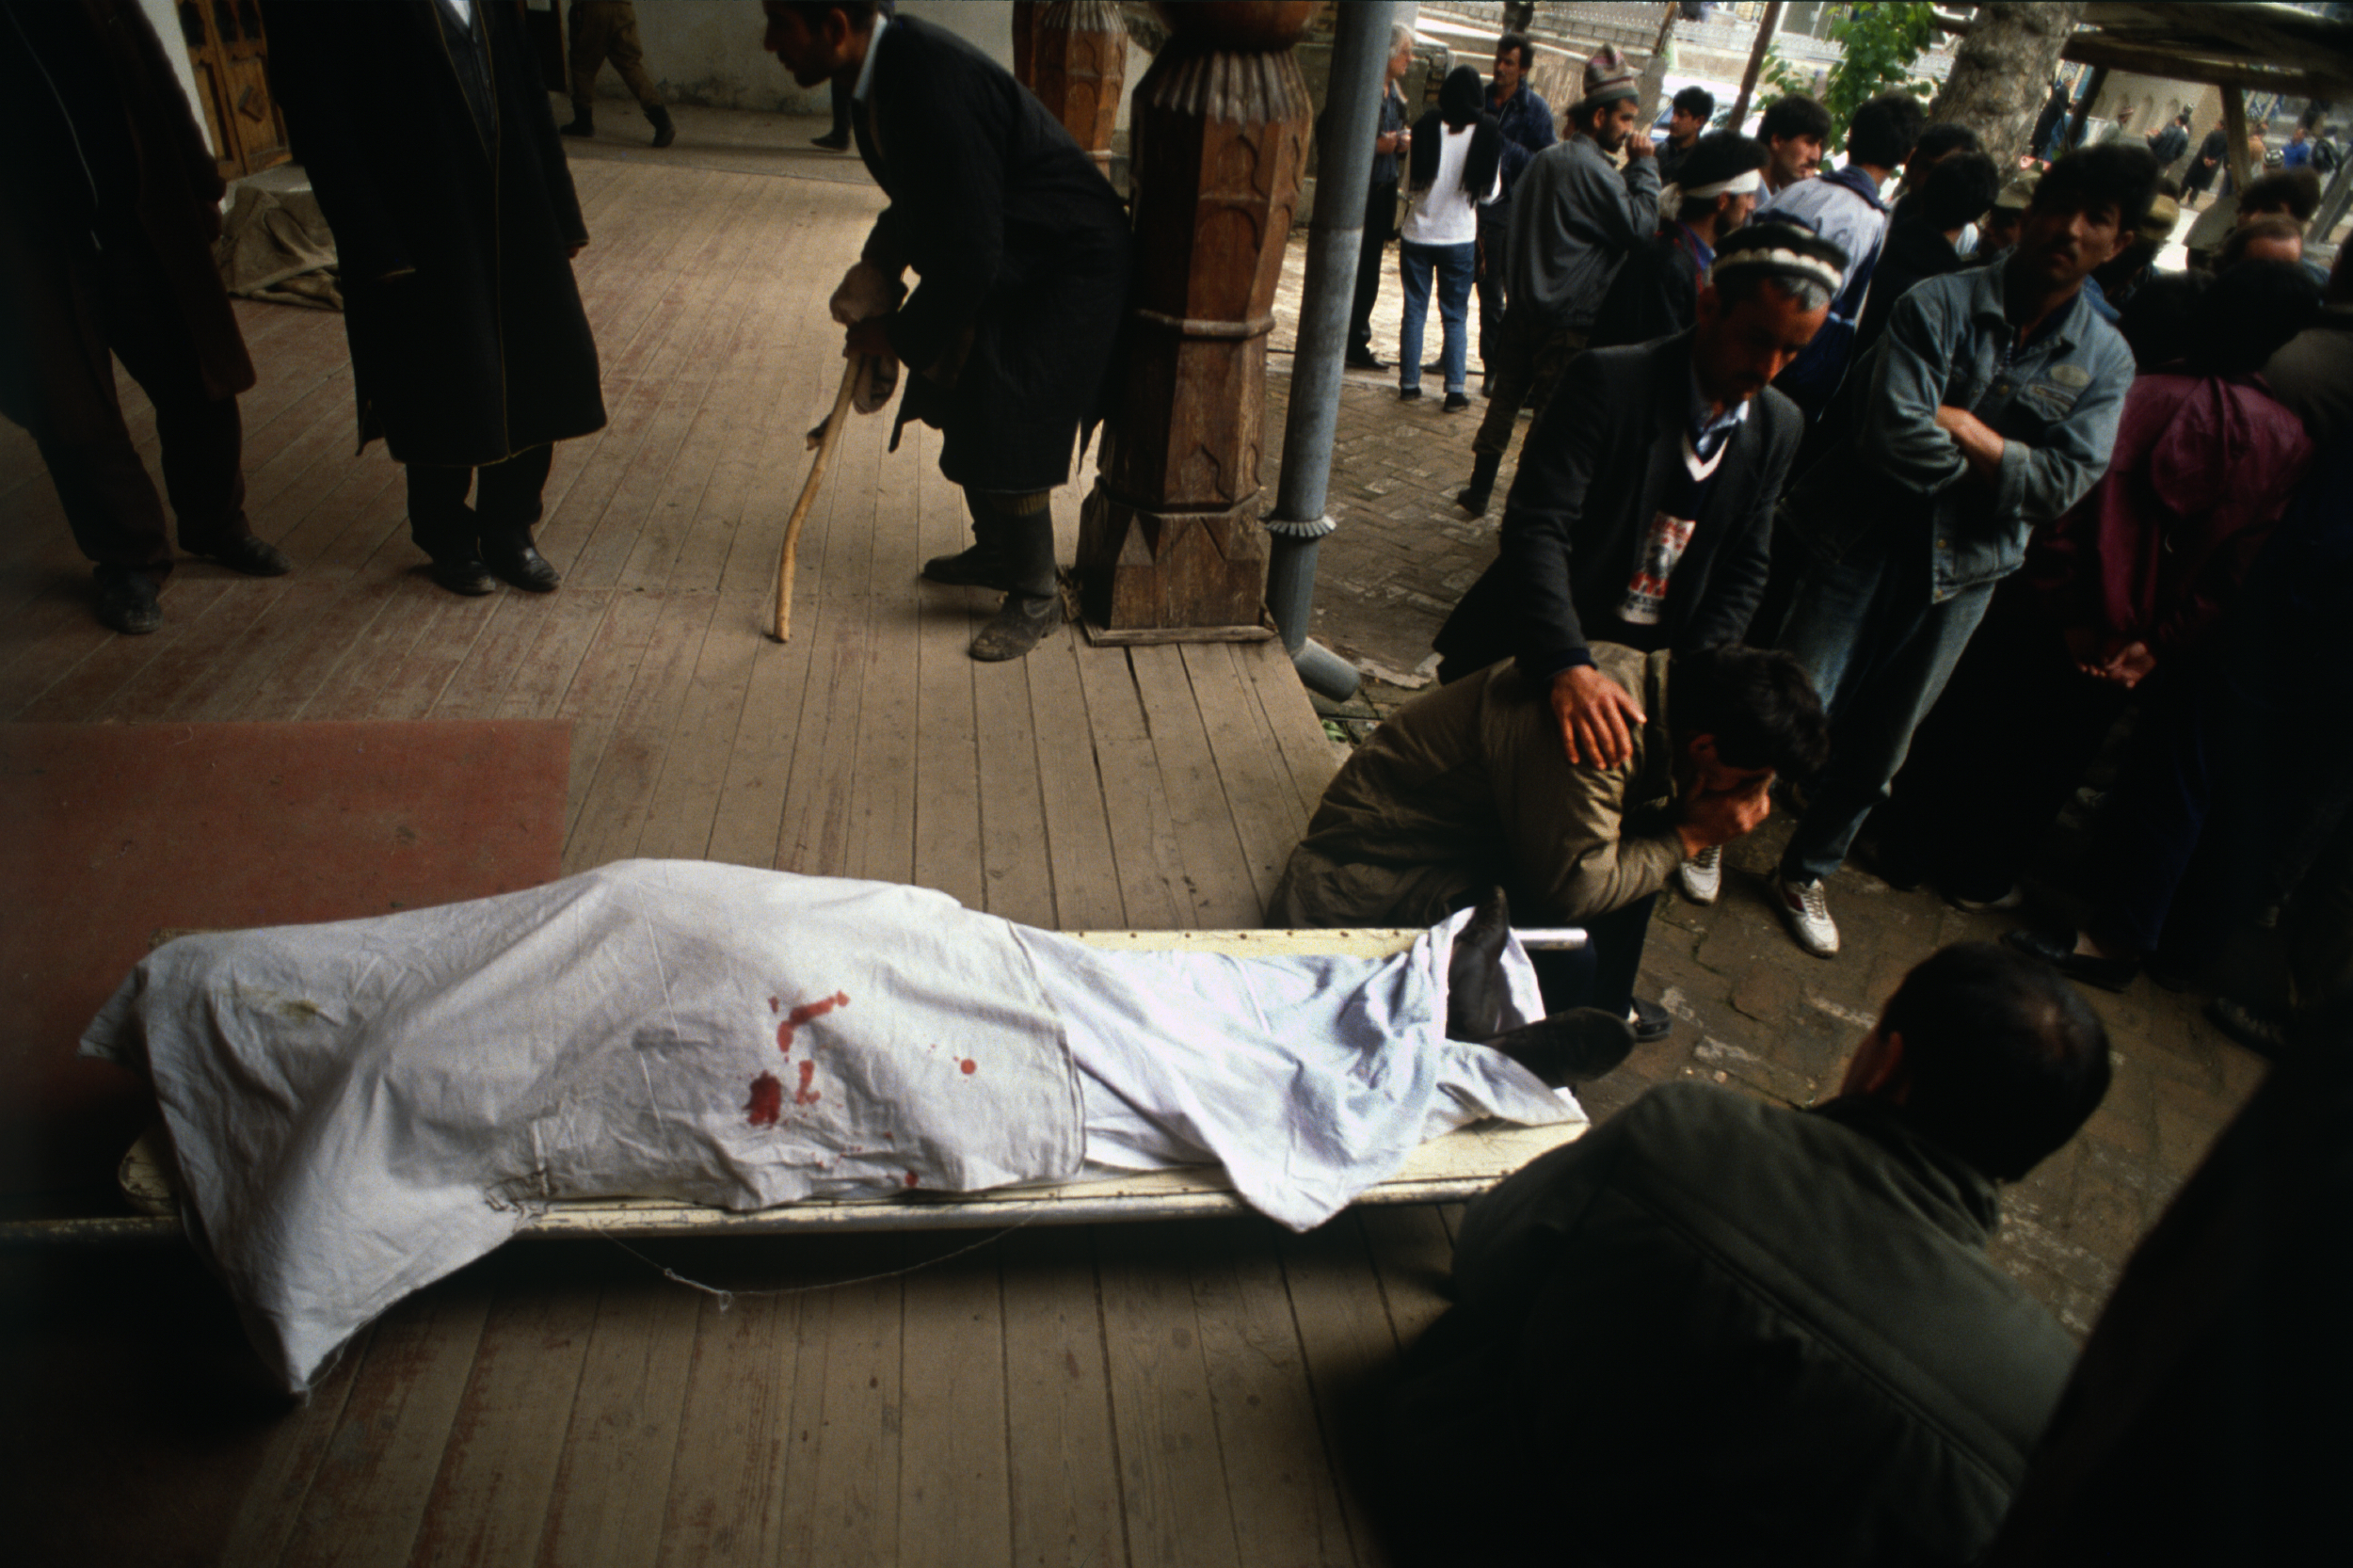  Islamic Renaissance party member shot dead, (headshot) &nbsp;by a government sniper in Dushanbe,&nbsp;Tajikistan. The Islamic Renaissance Party were fighting to overthrow the Soviet backed government in power. Tajikistan,&nbsp;1992 